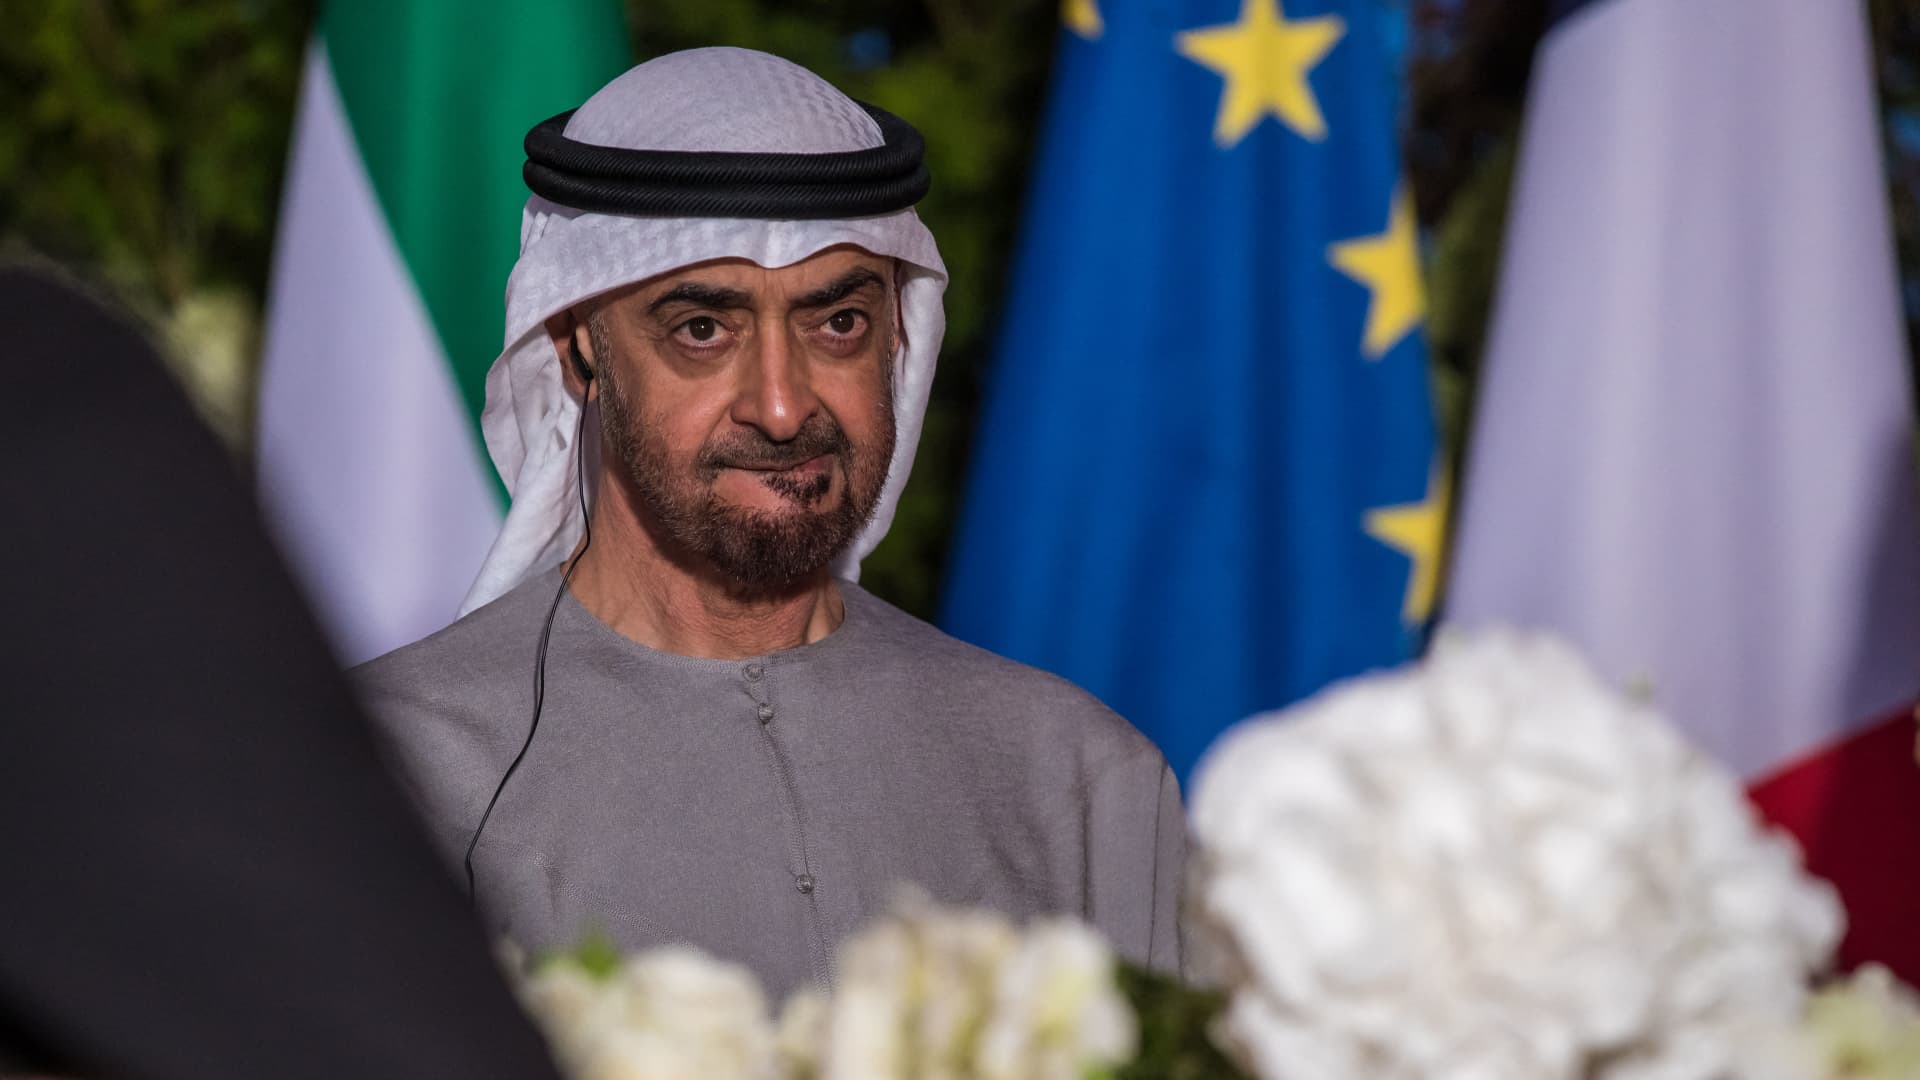 UAE president to meet Putin in Russia, a week after OPEC+’s deep output cuts